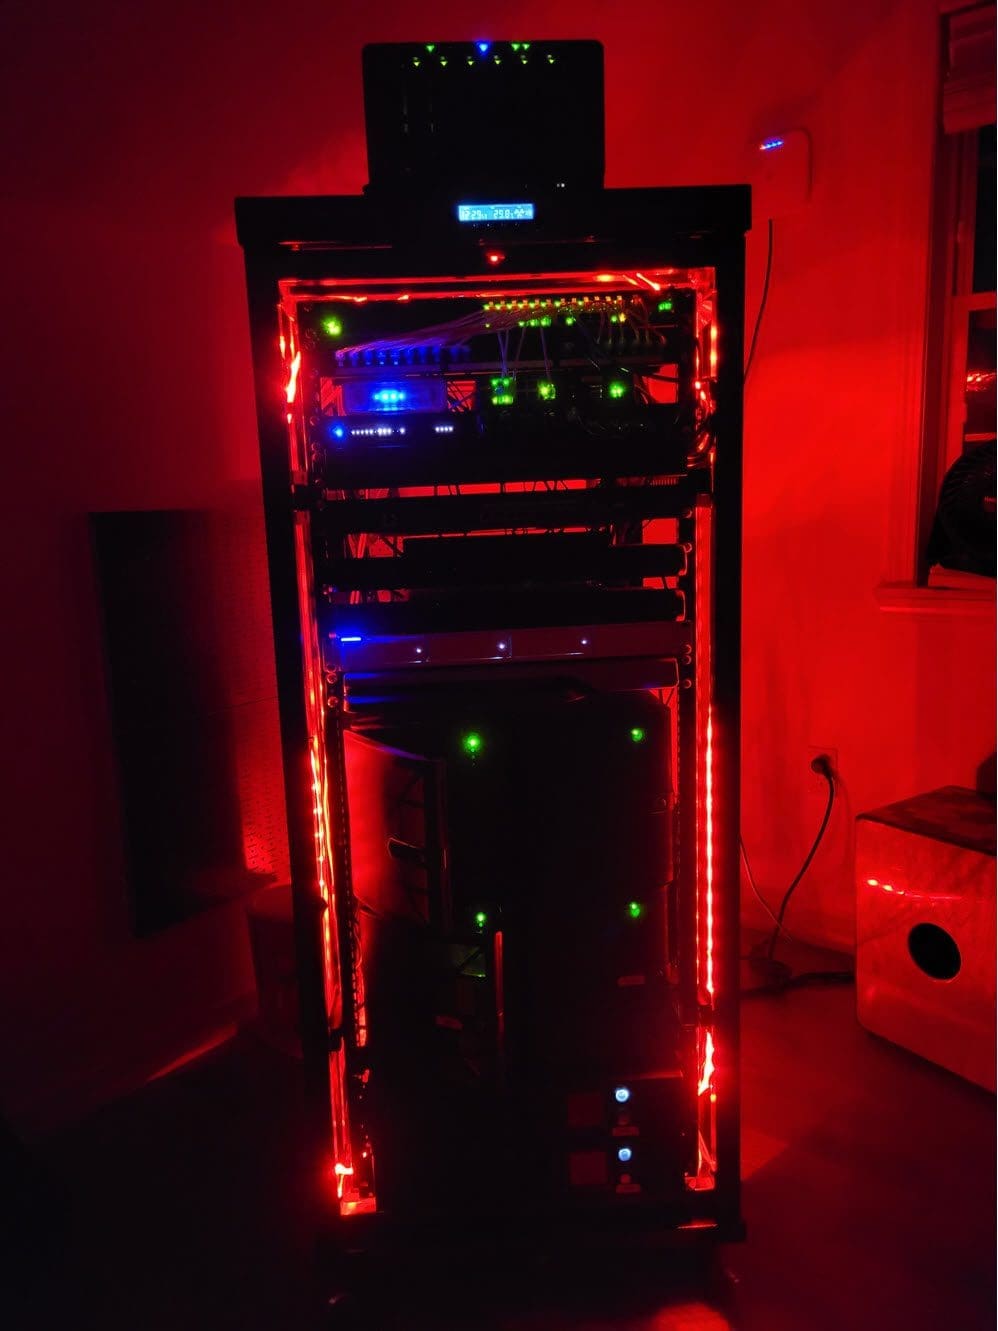 Red RGB lights in home server rack